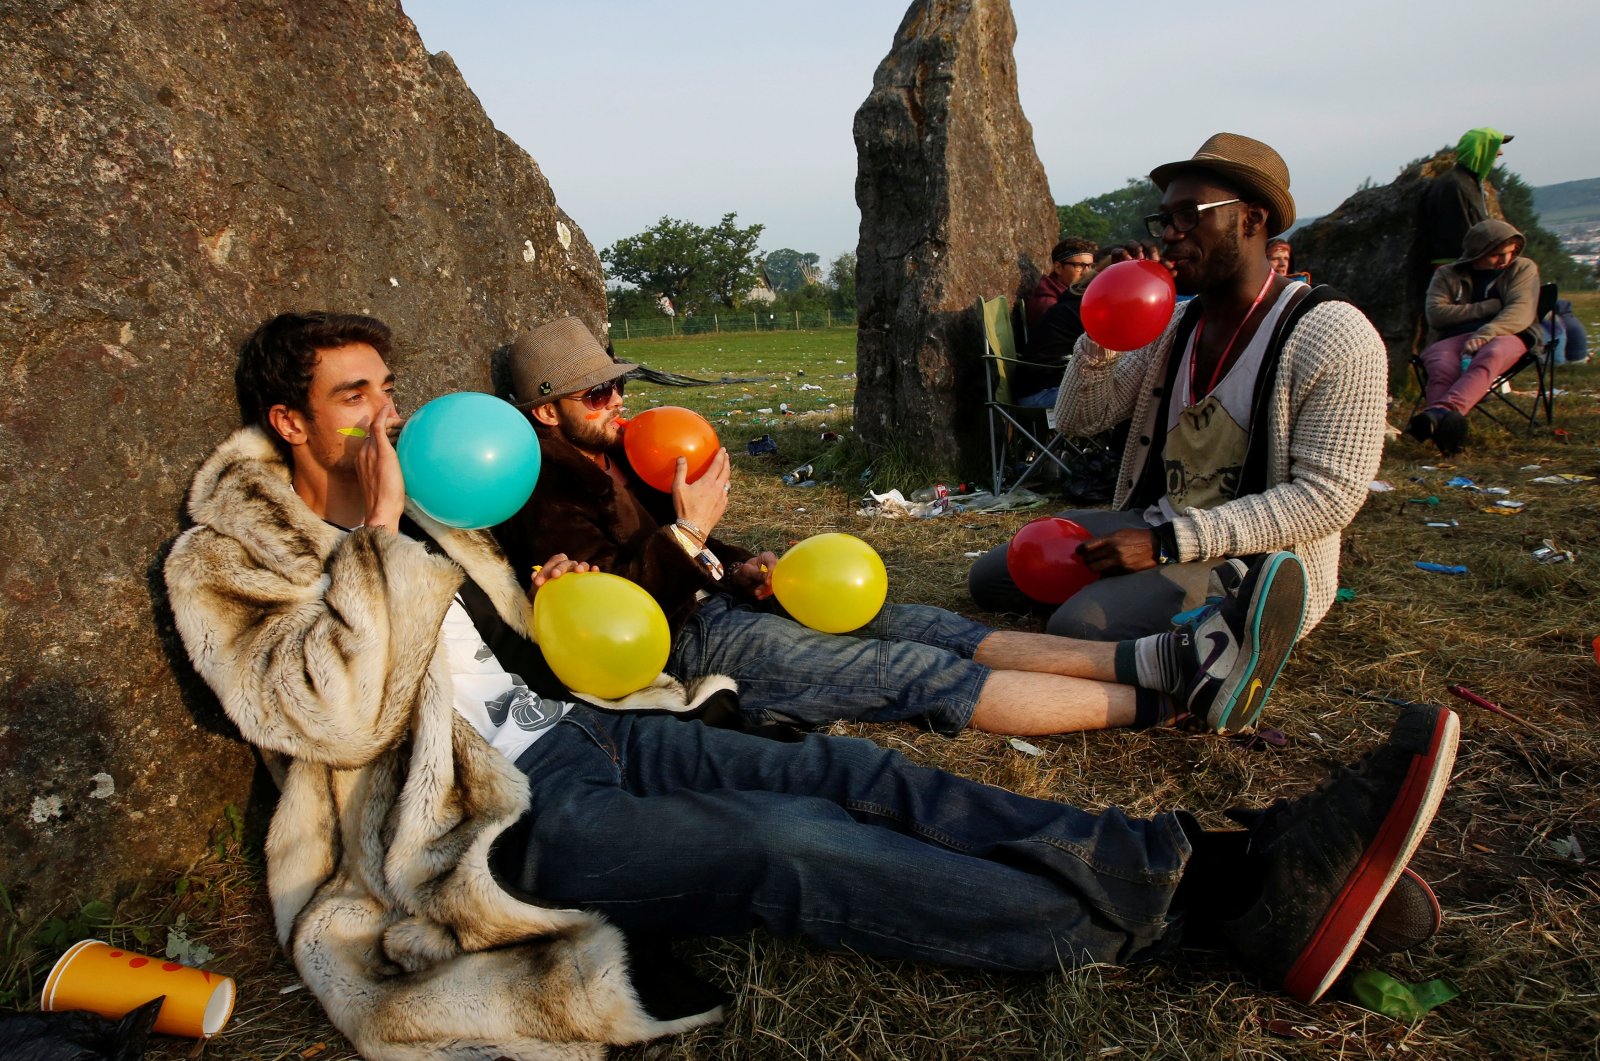 Festival goers inhale laughing gas at sunrise at the stone circle on the second day of the Glastonbury music festival at Worthy Farm in Somerset, U.K., June 27, 2013. (Reuters Photo)